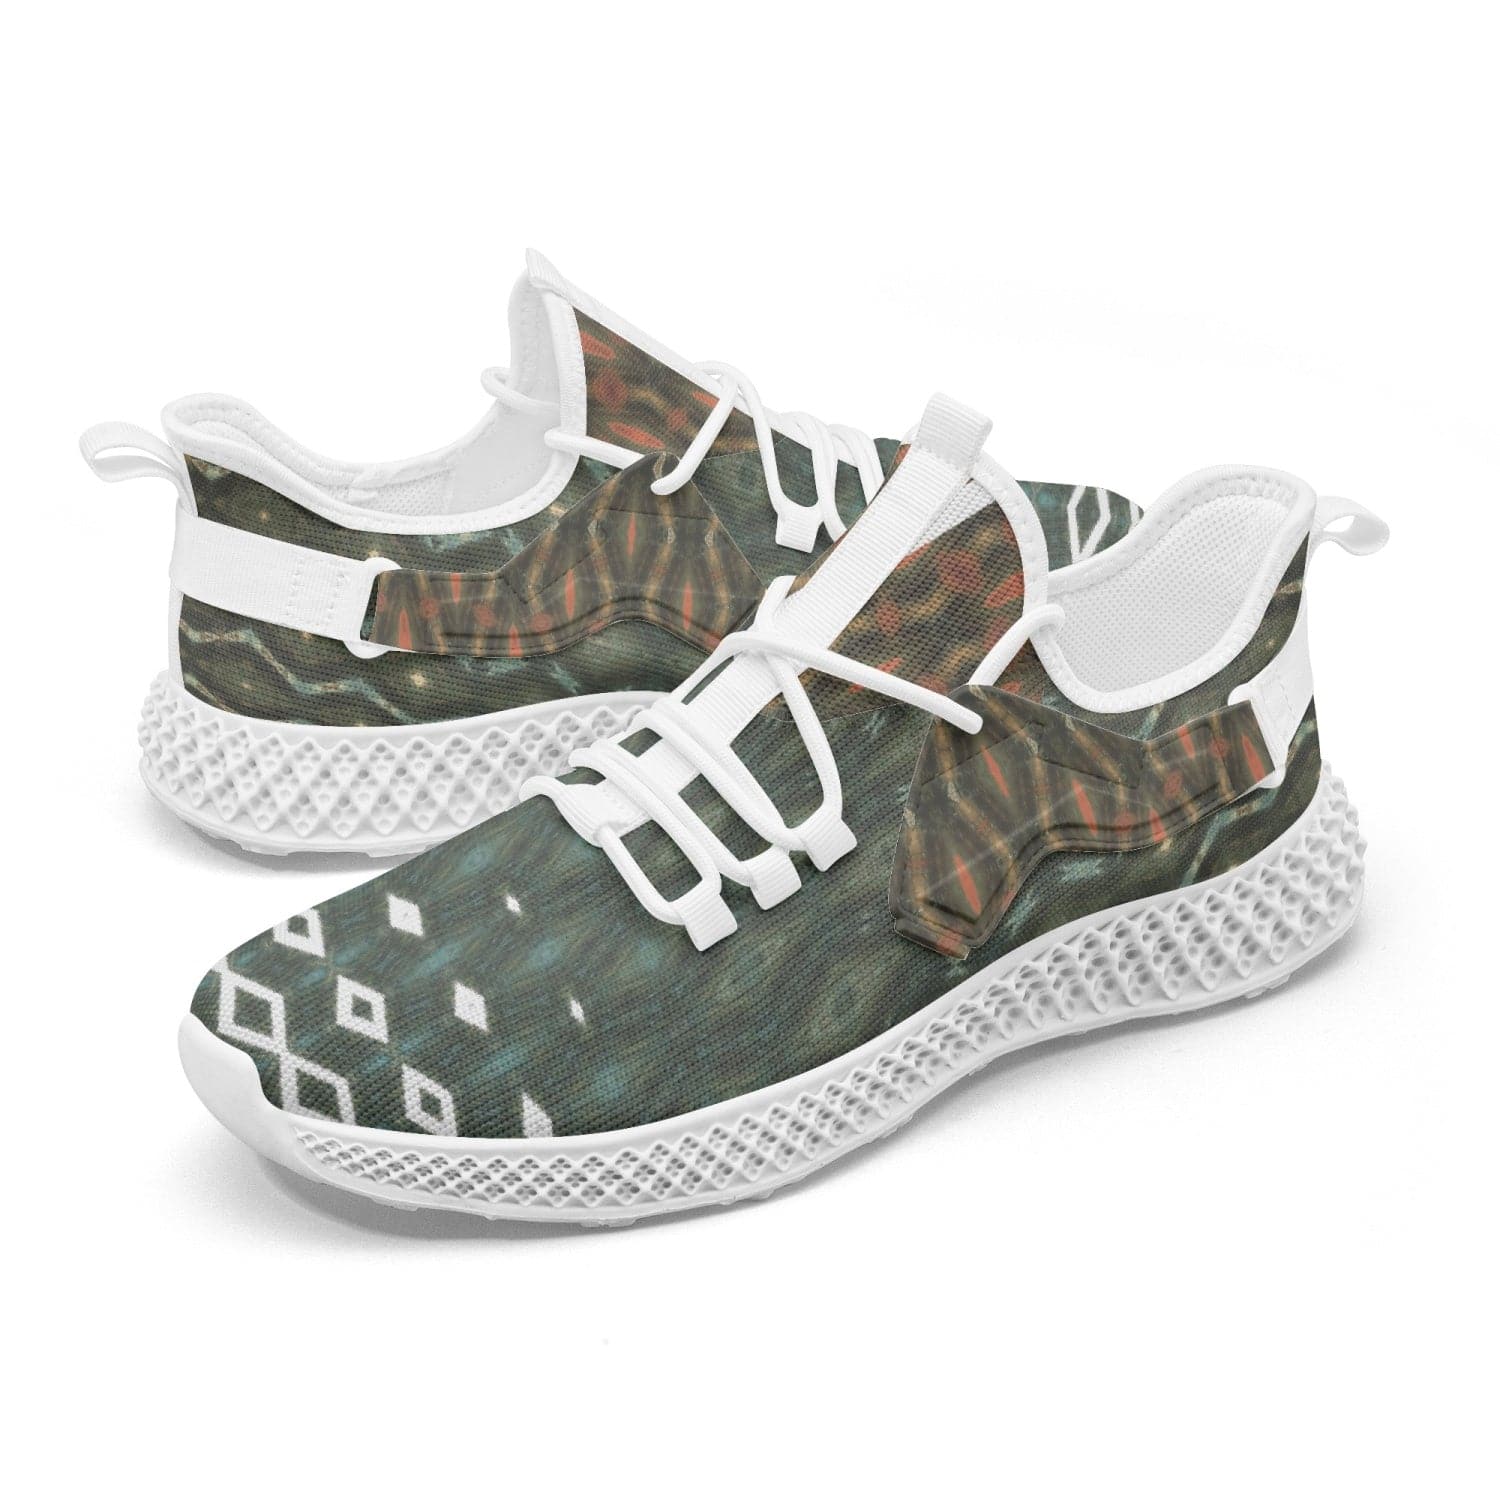 The Art of Green and Brown, Men's Sports  Net Style Mesh Knit Sneakers, by Sensus Studio Design